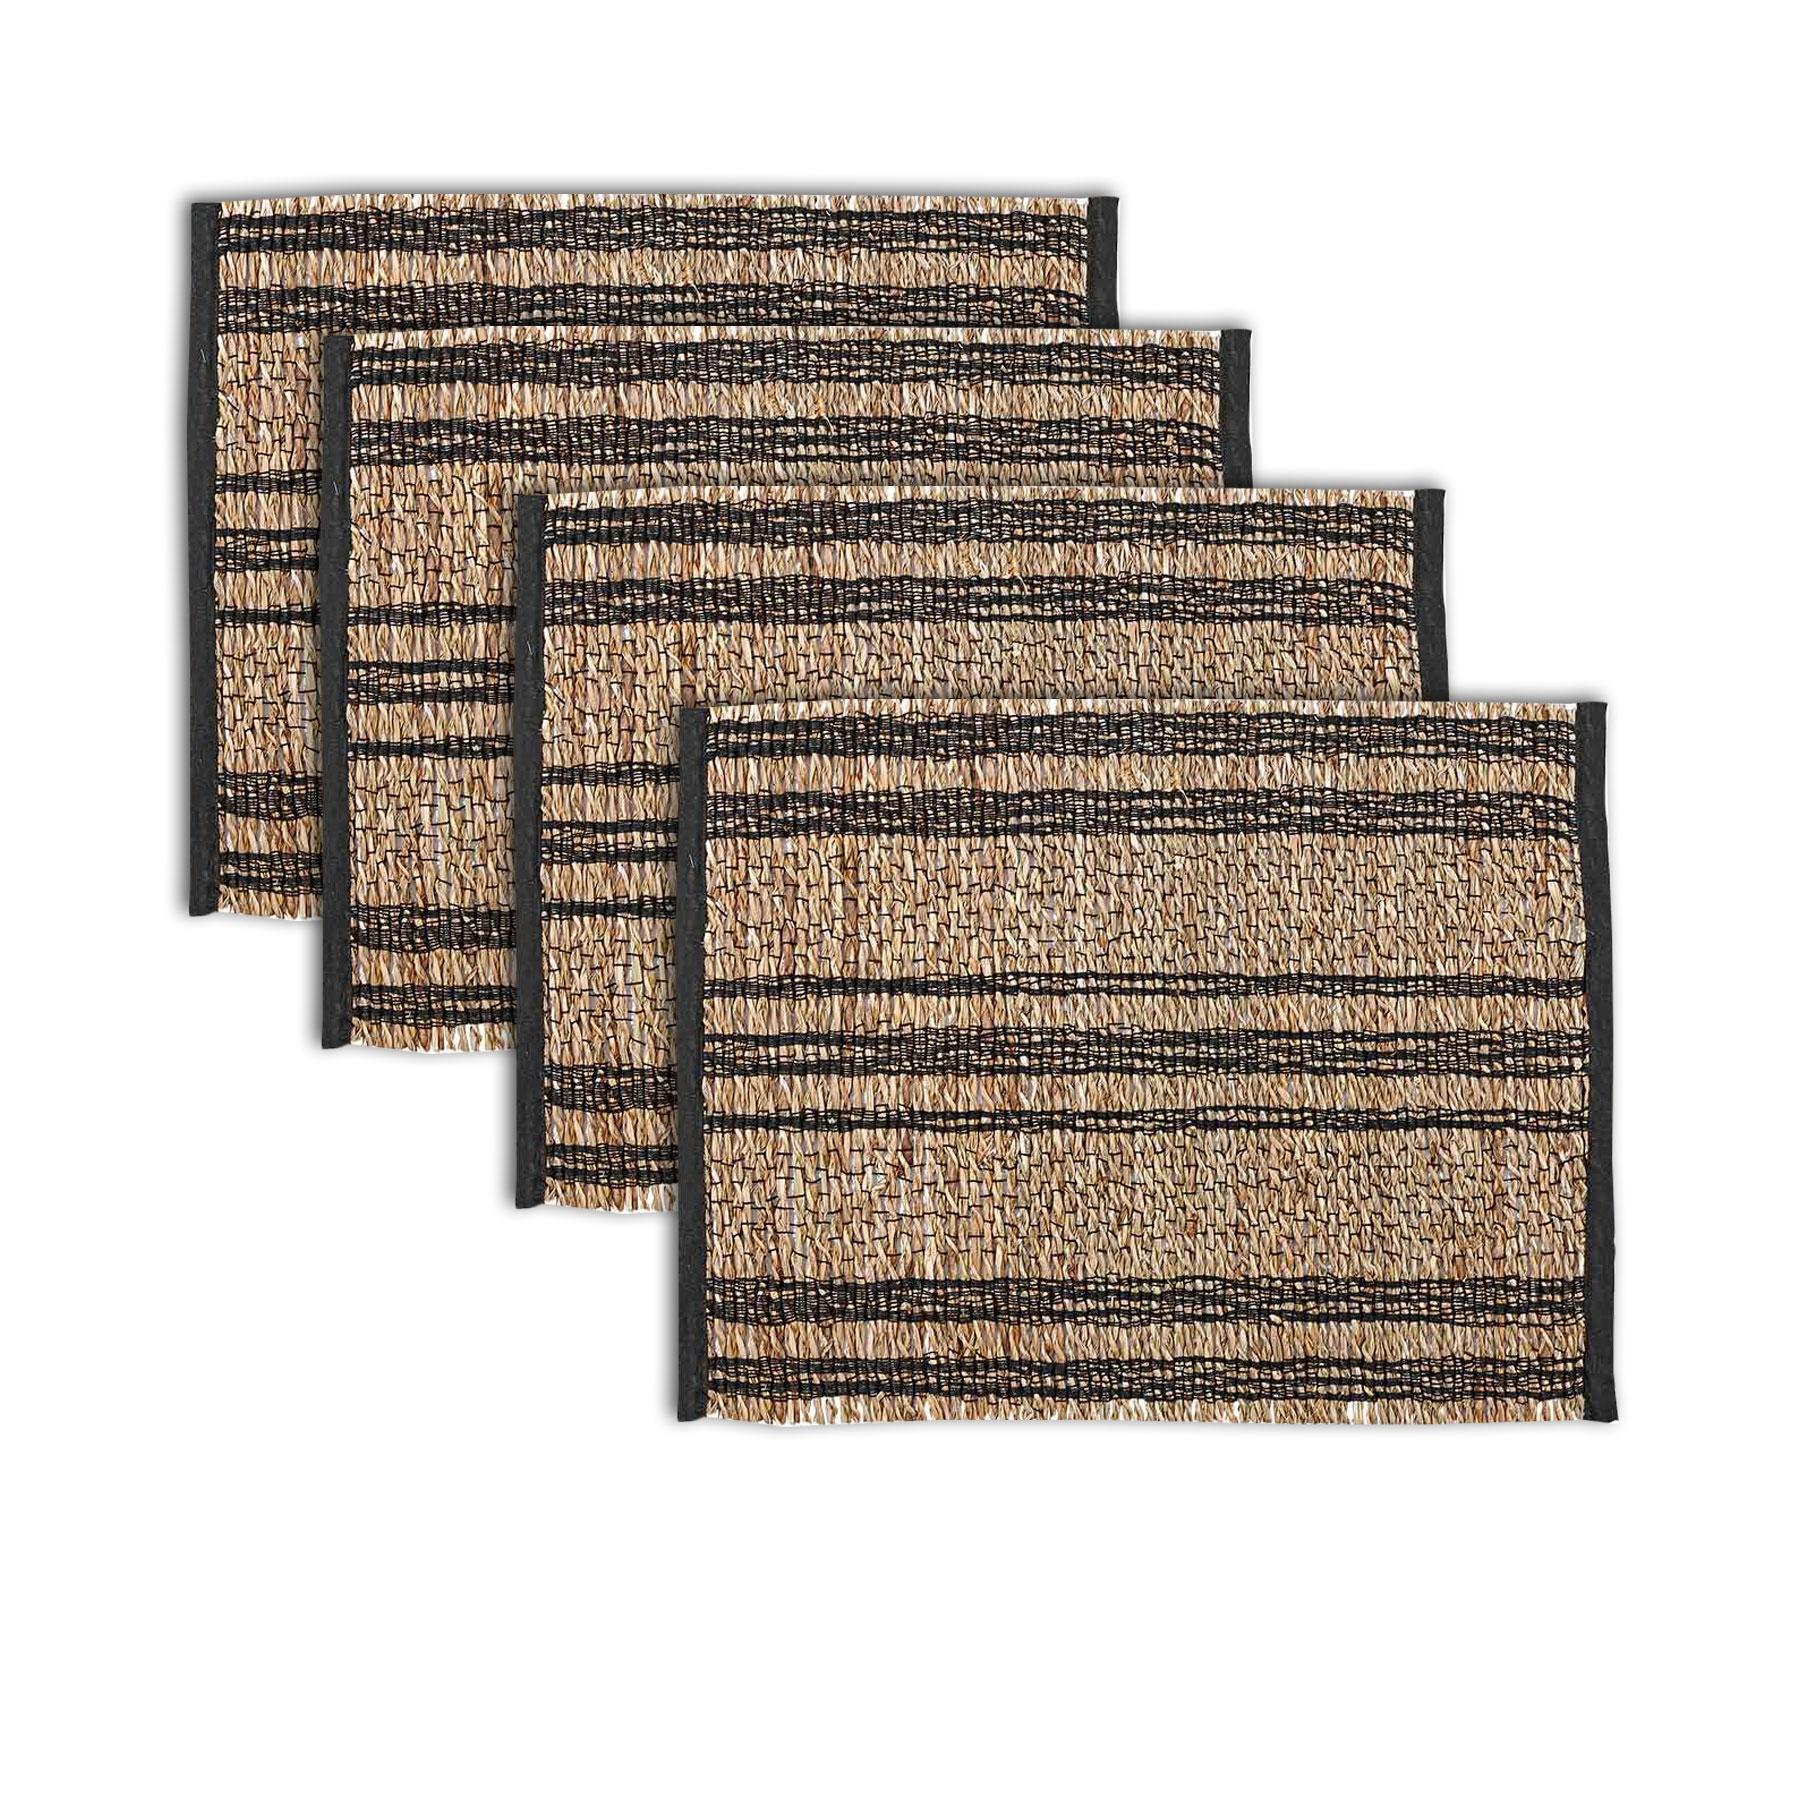 Ladelle Set of 4 Loma Woven Table Placemats Black